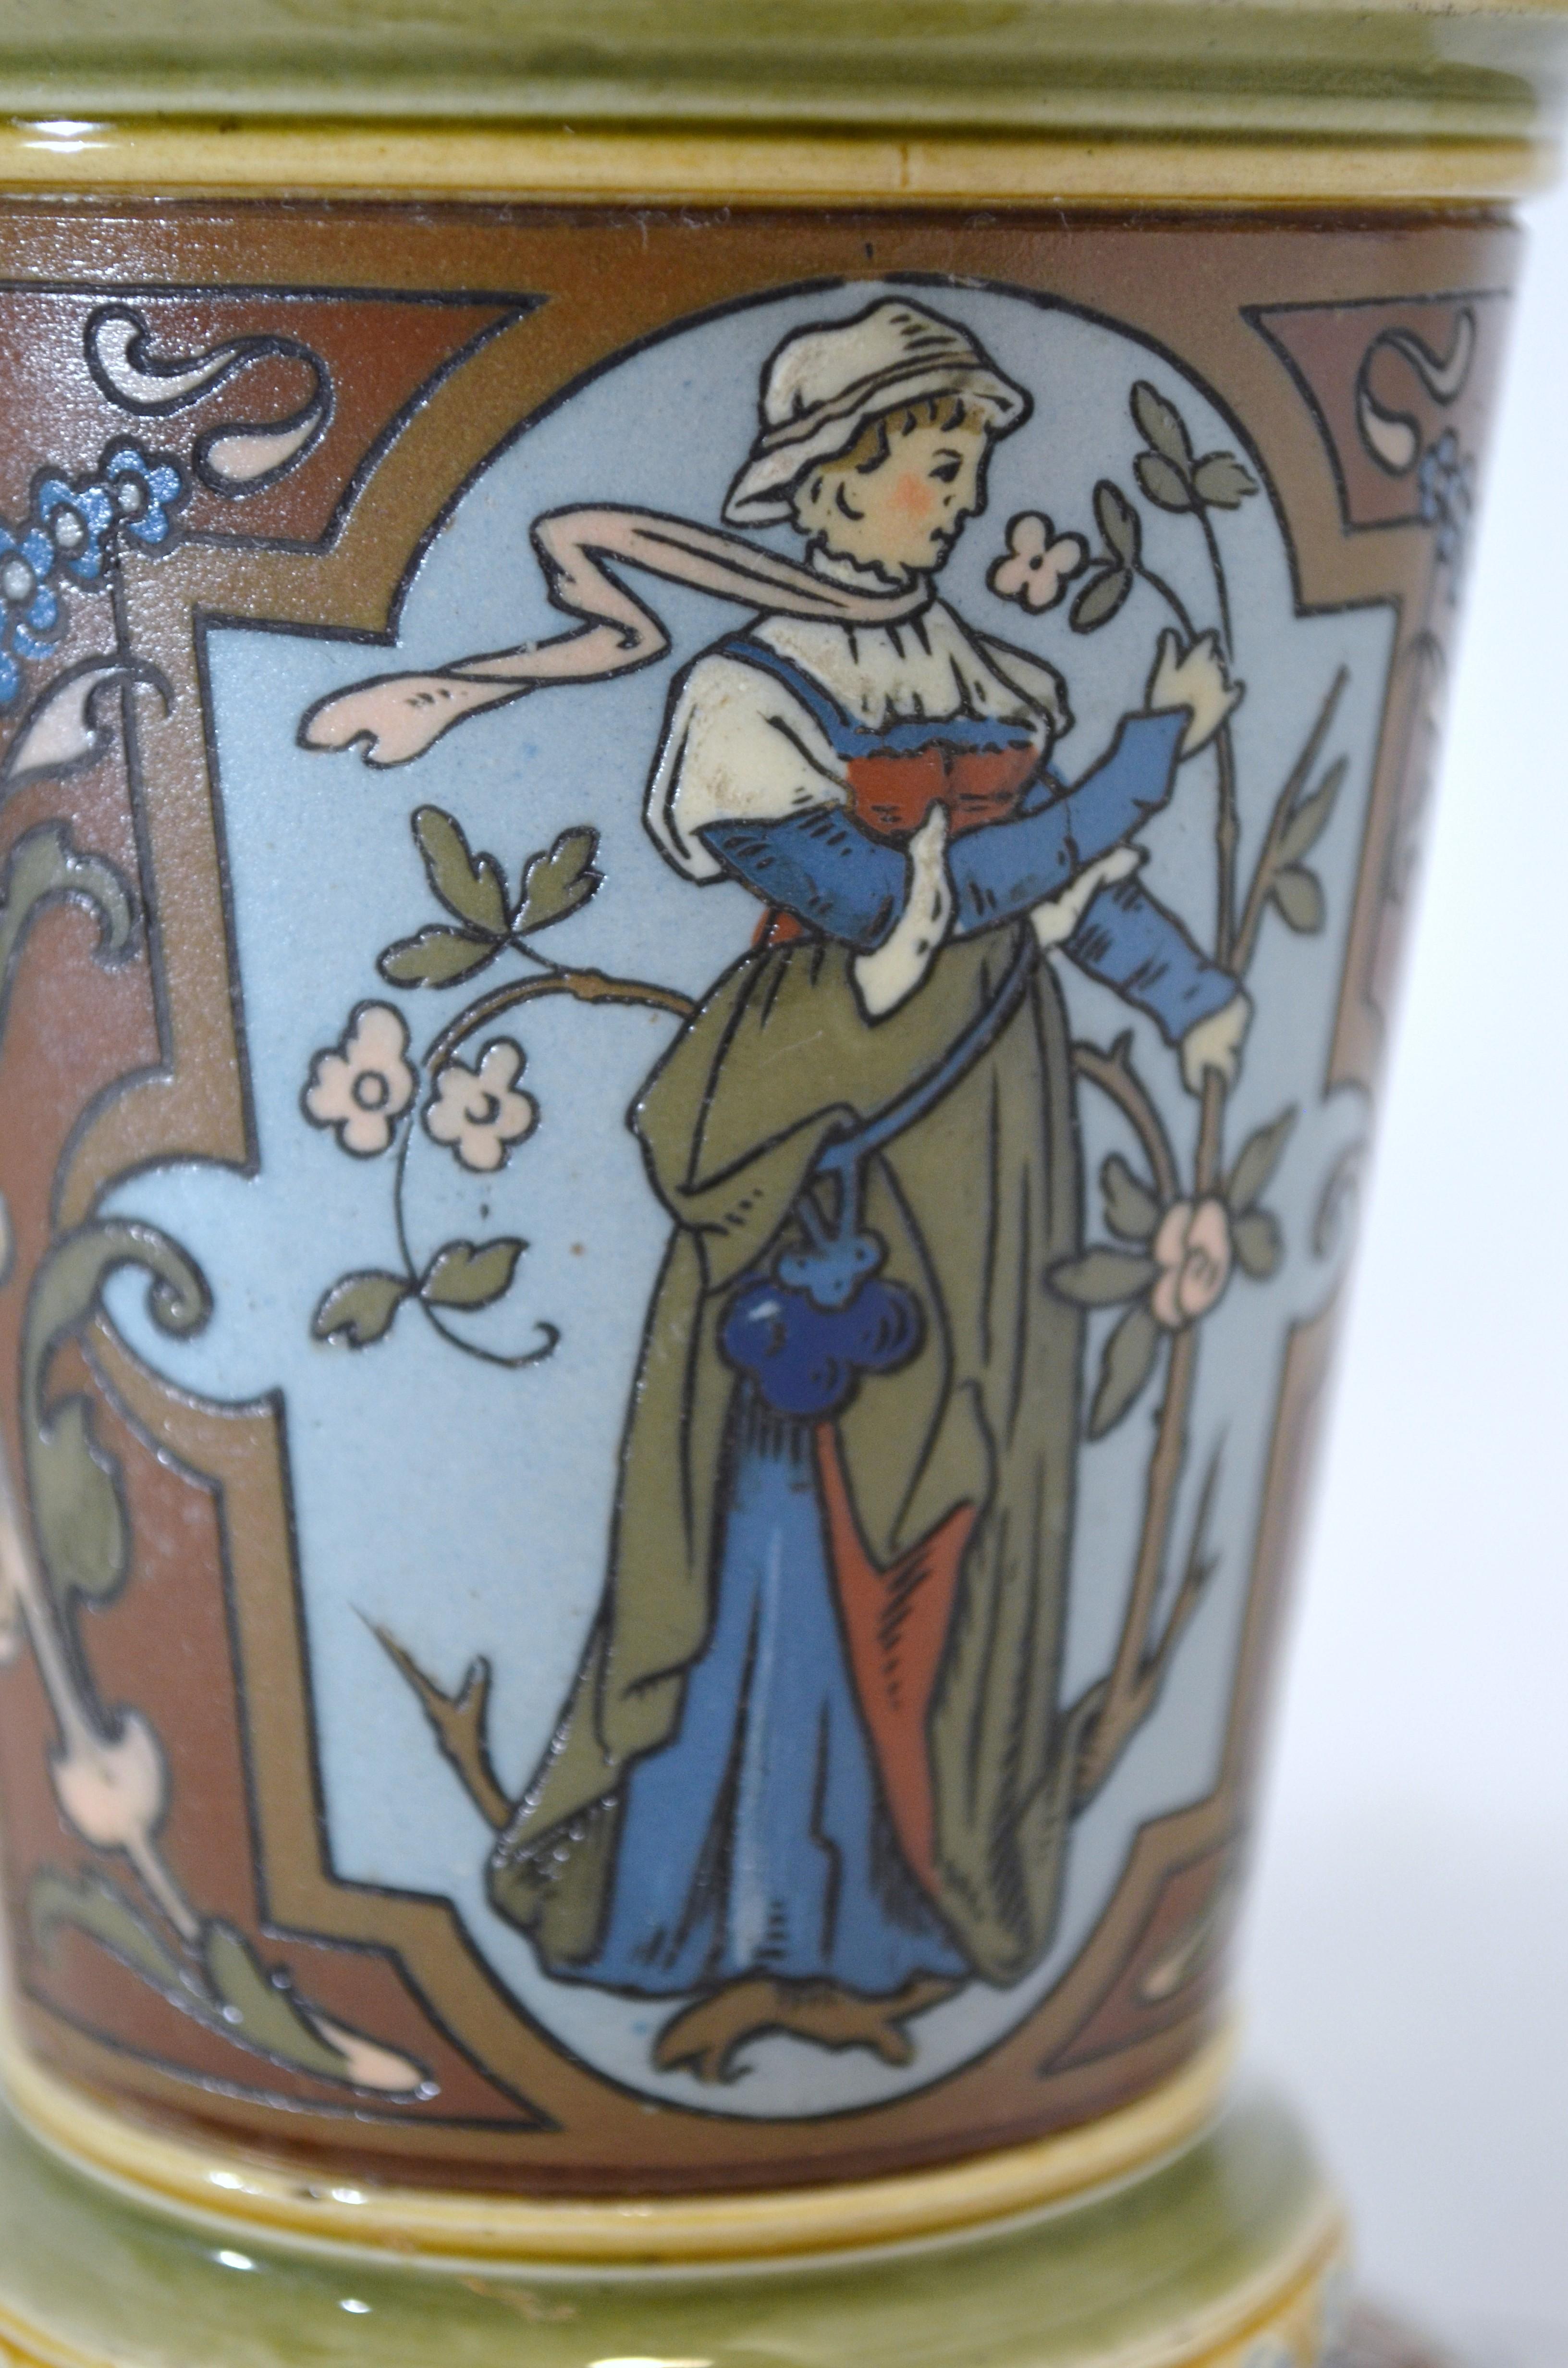 Late 19th Century Villeroy and Boch Mettlach 1890 1900 Mosaic Ceramic Vase Decorated with Women For Sale